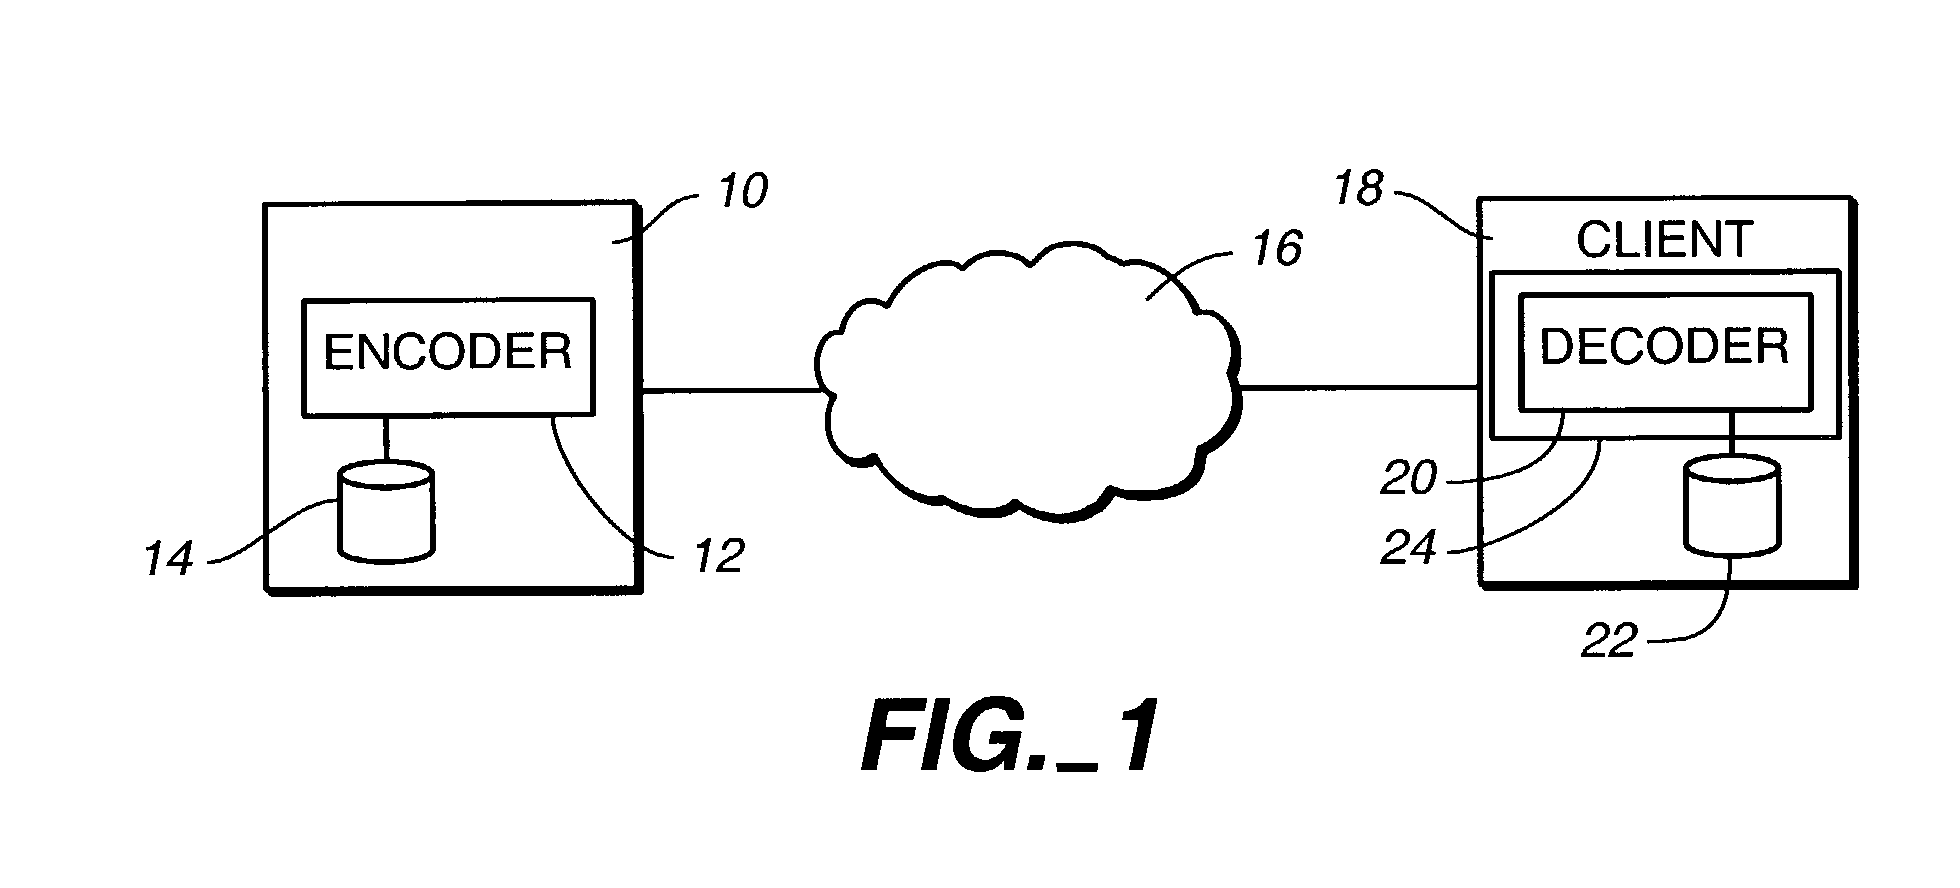 Method for accelerating delivery of content in a computer network